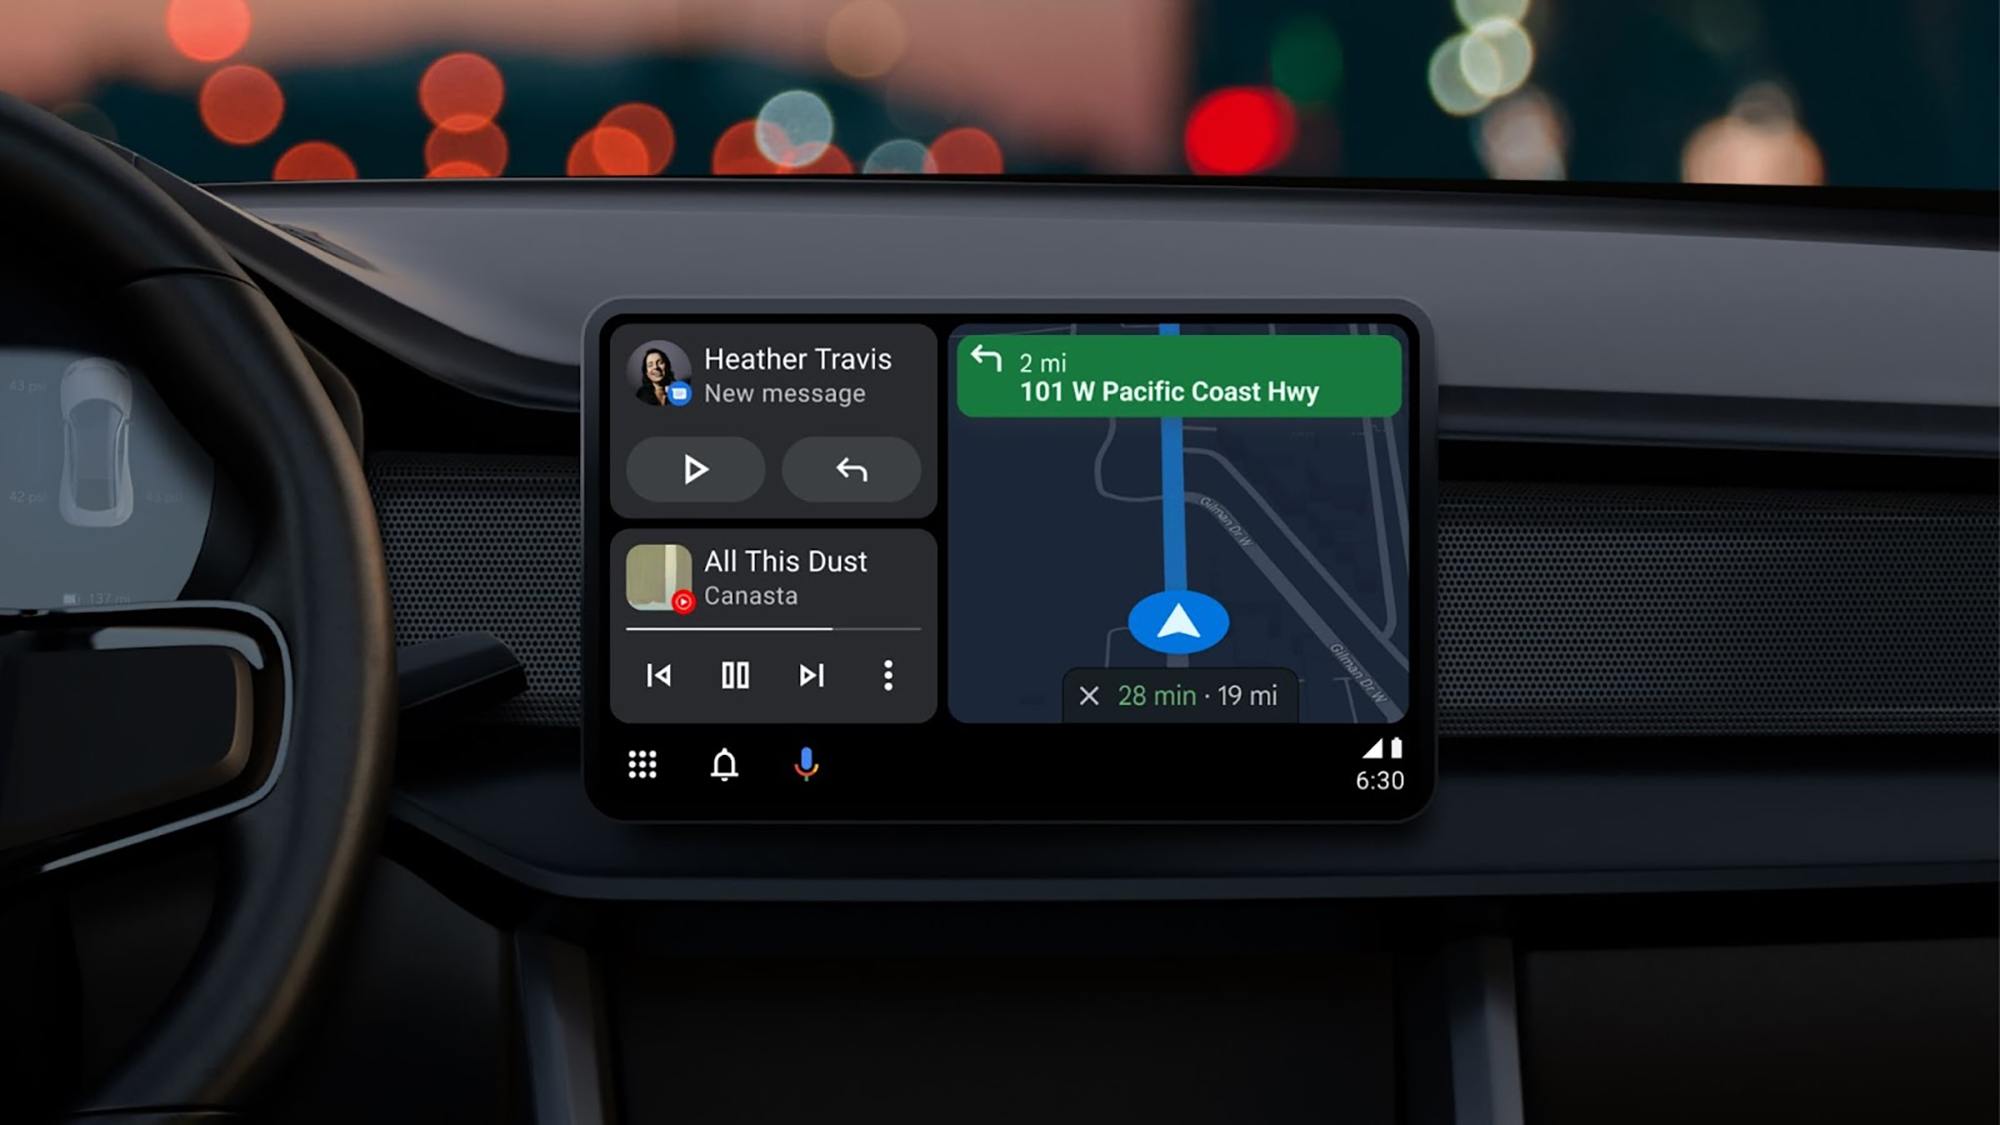 Take advantage of all of Android Auto’s new customizations